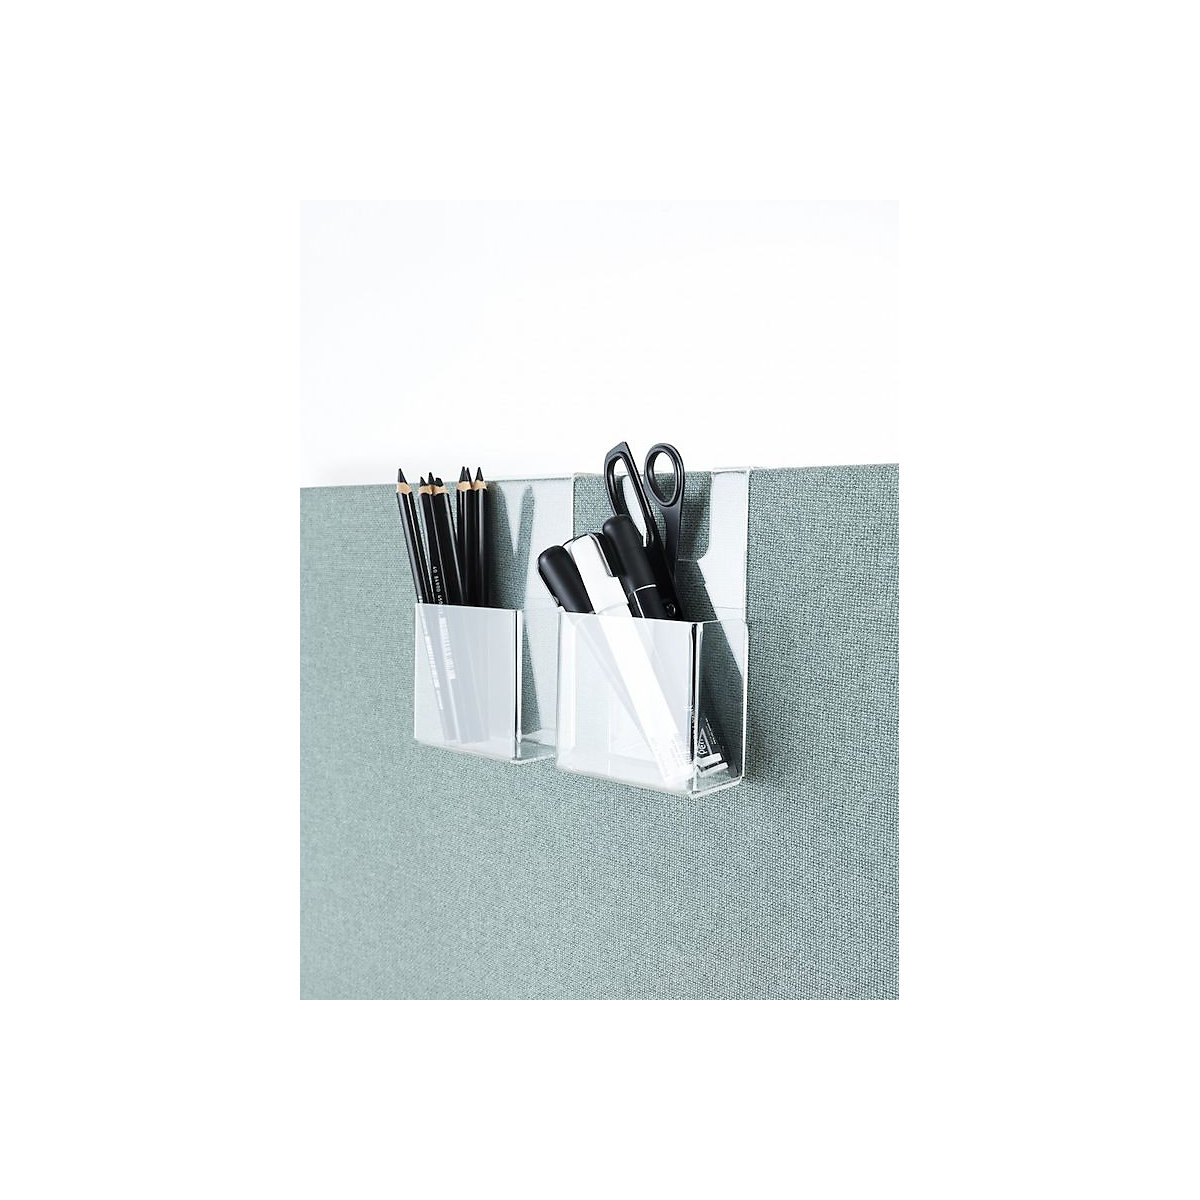 Pencil holder for acoustic partition